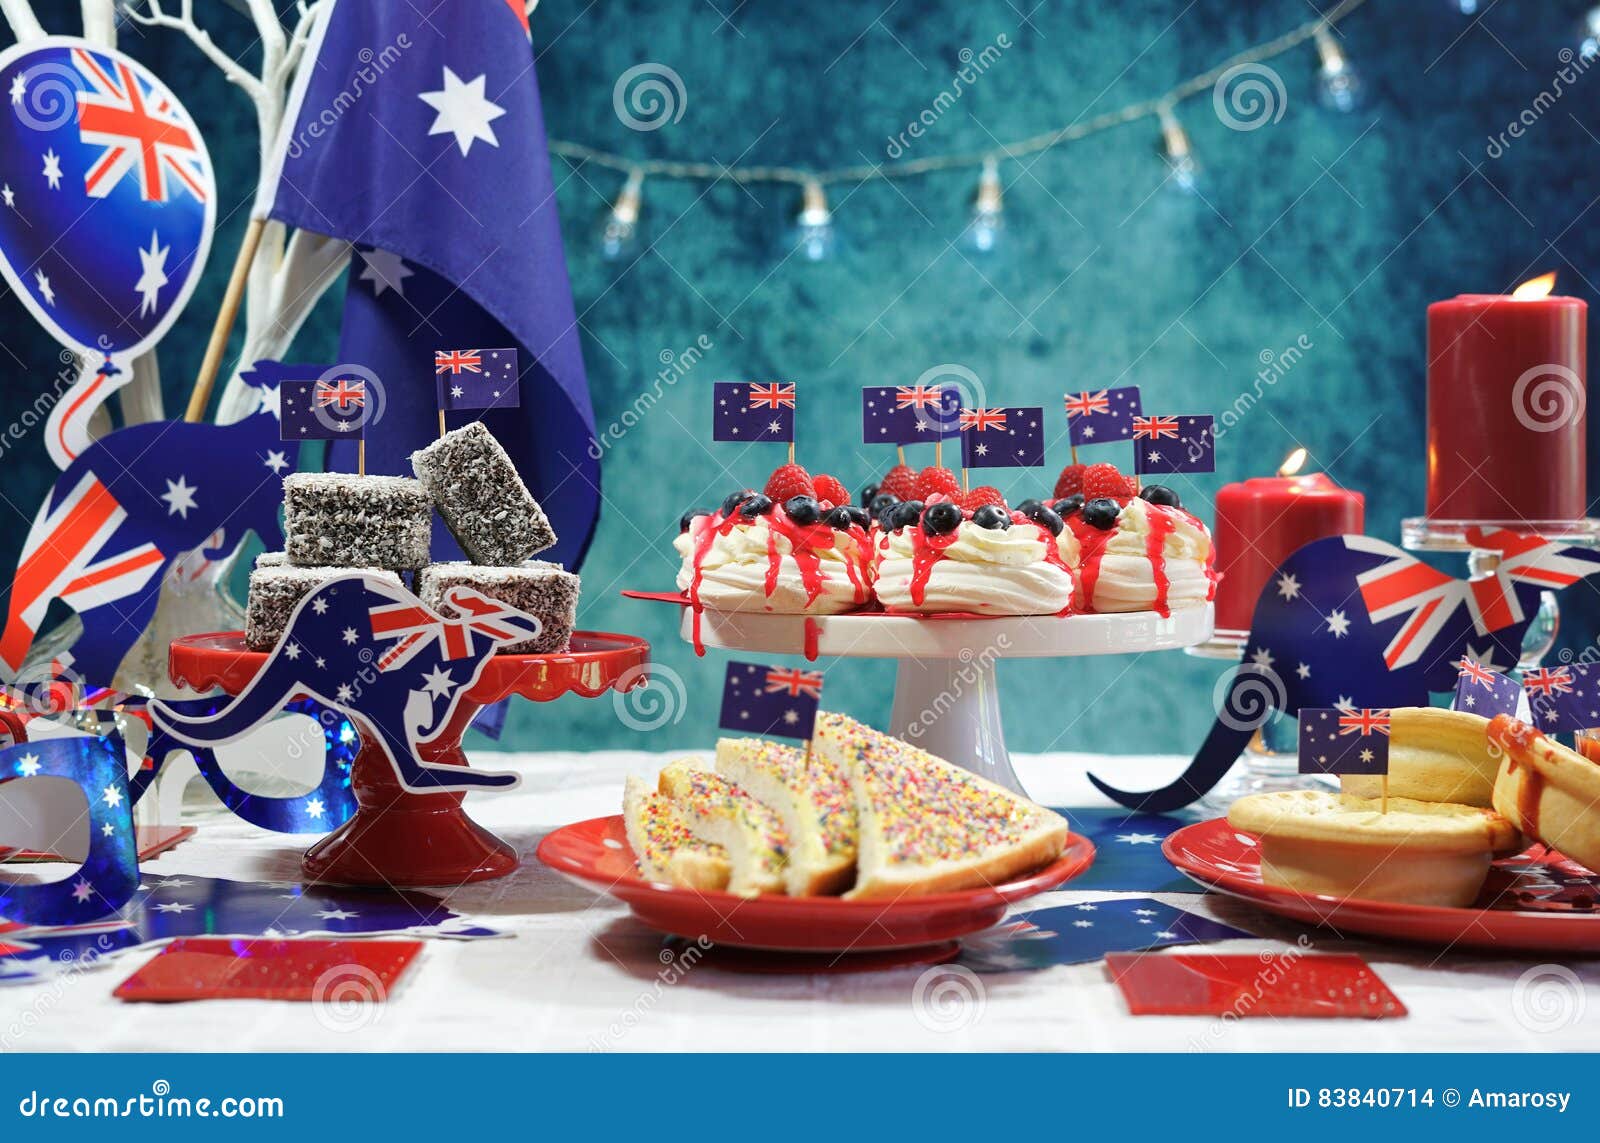  Australian  Theme Party  Table With Flags And Iconic Food 